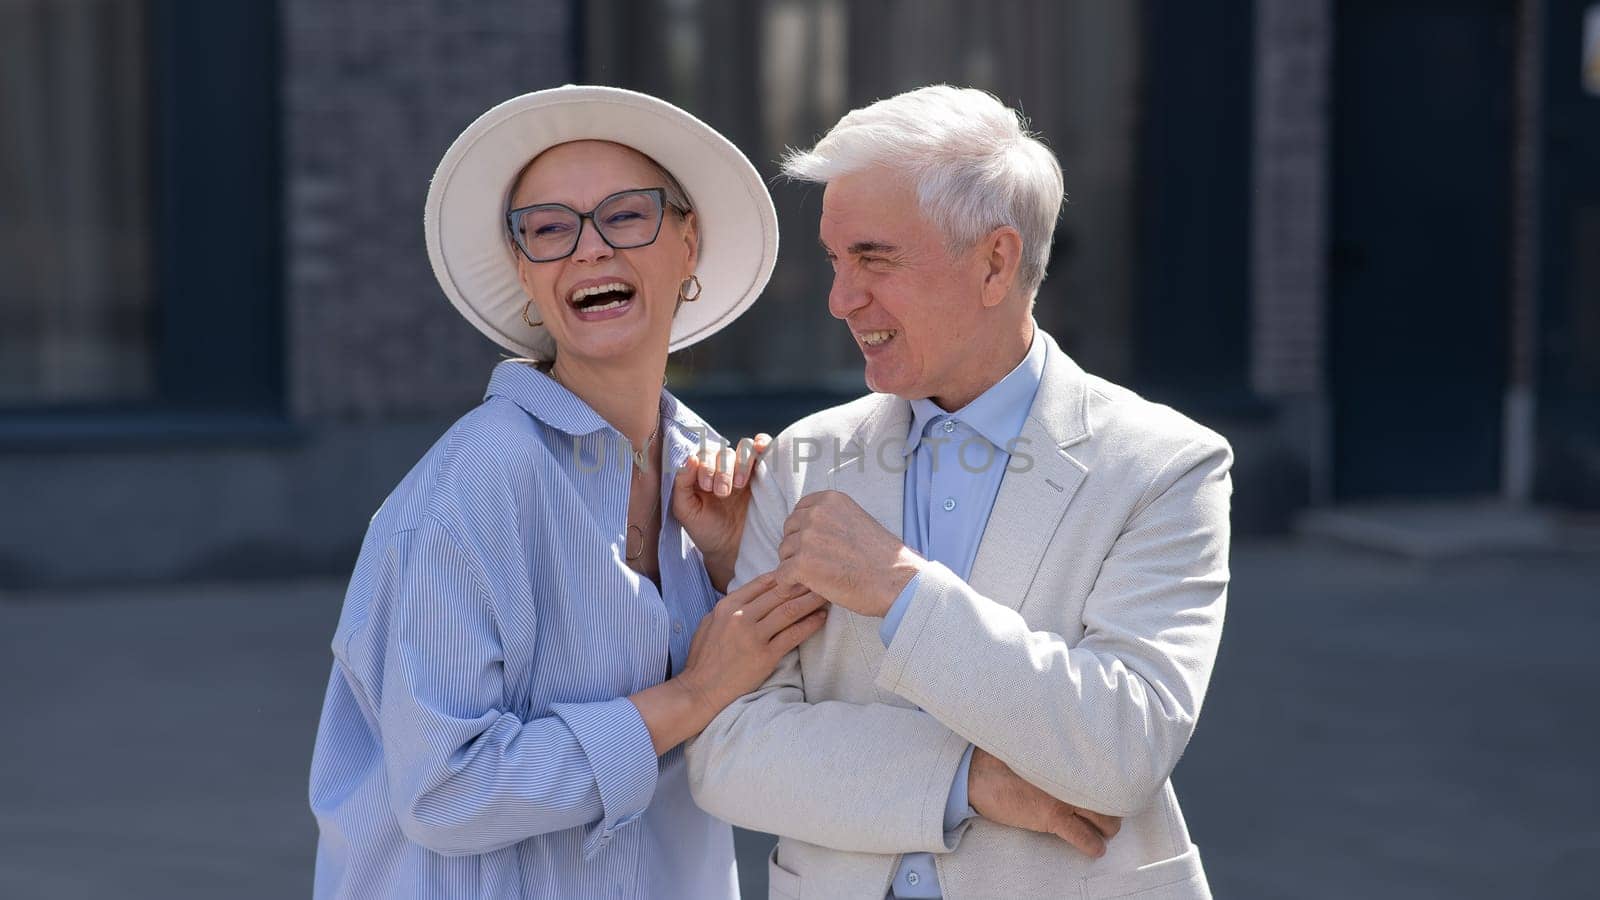 An elderly couple in love walks through the city. Portrait of a stylish gray-haired man and woman